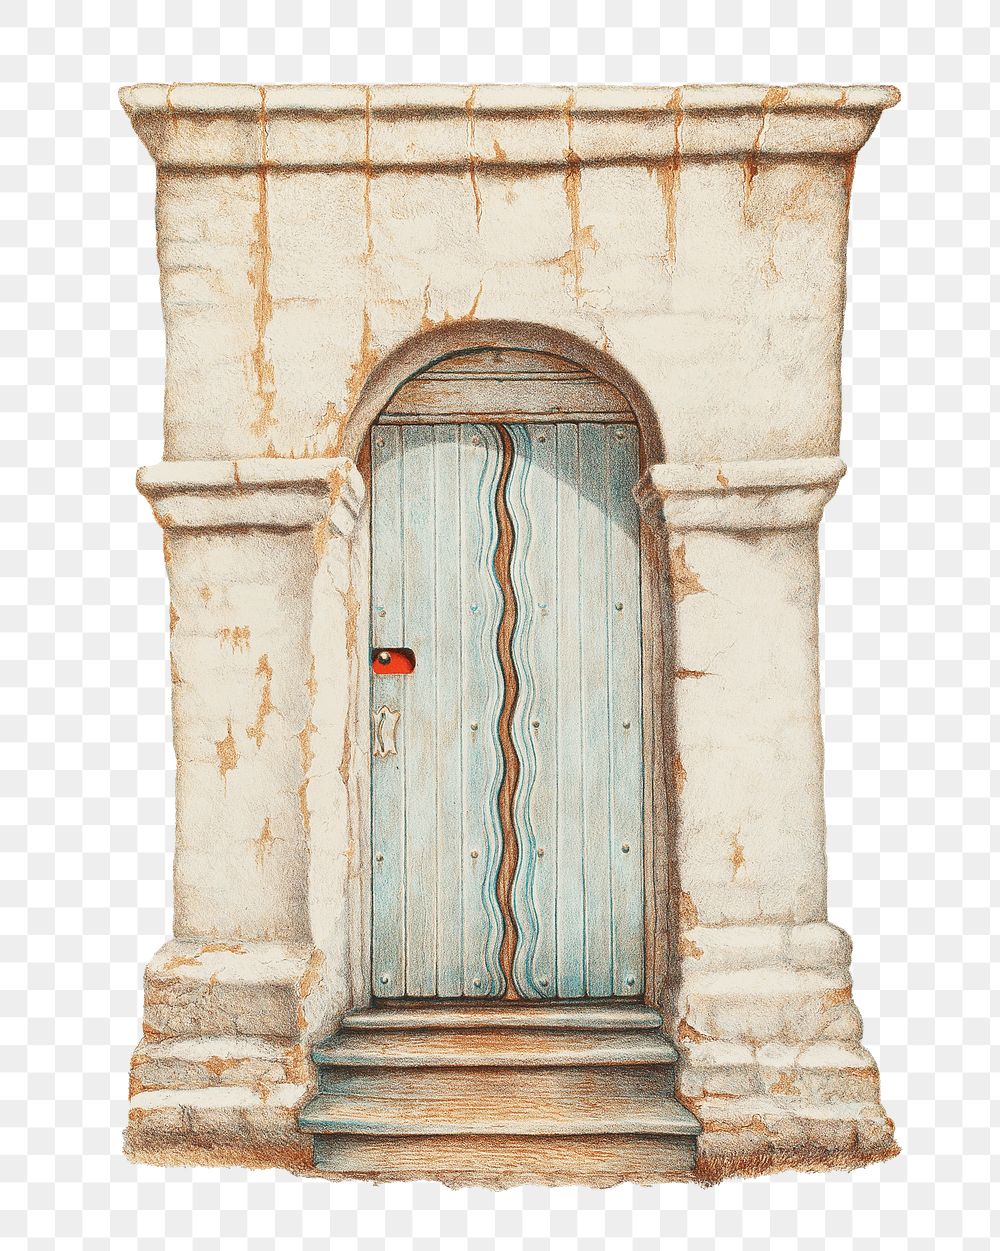 Arch door png vintage architecture sticker, transparent background.   Remastered by rawpixel